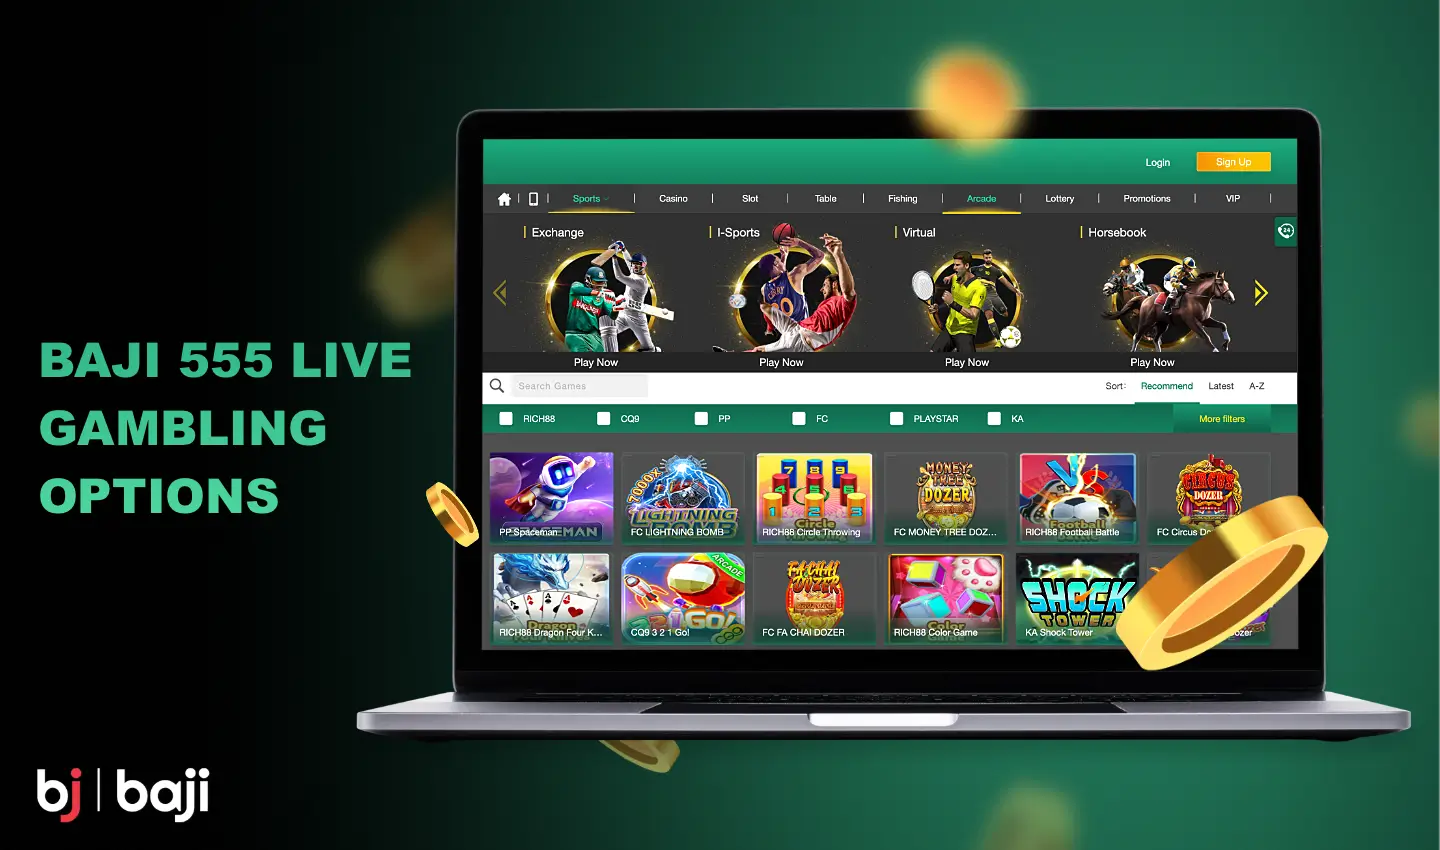 Users of the Baji 555 website have a variety of gambling options available to them